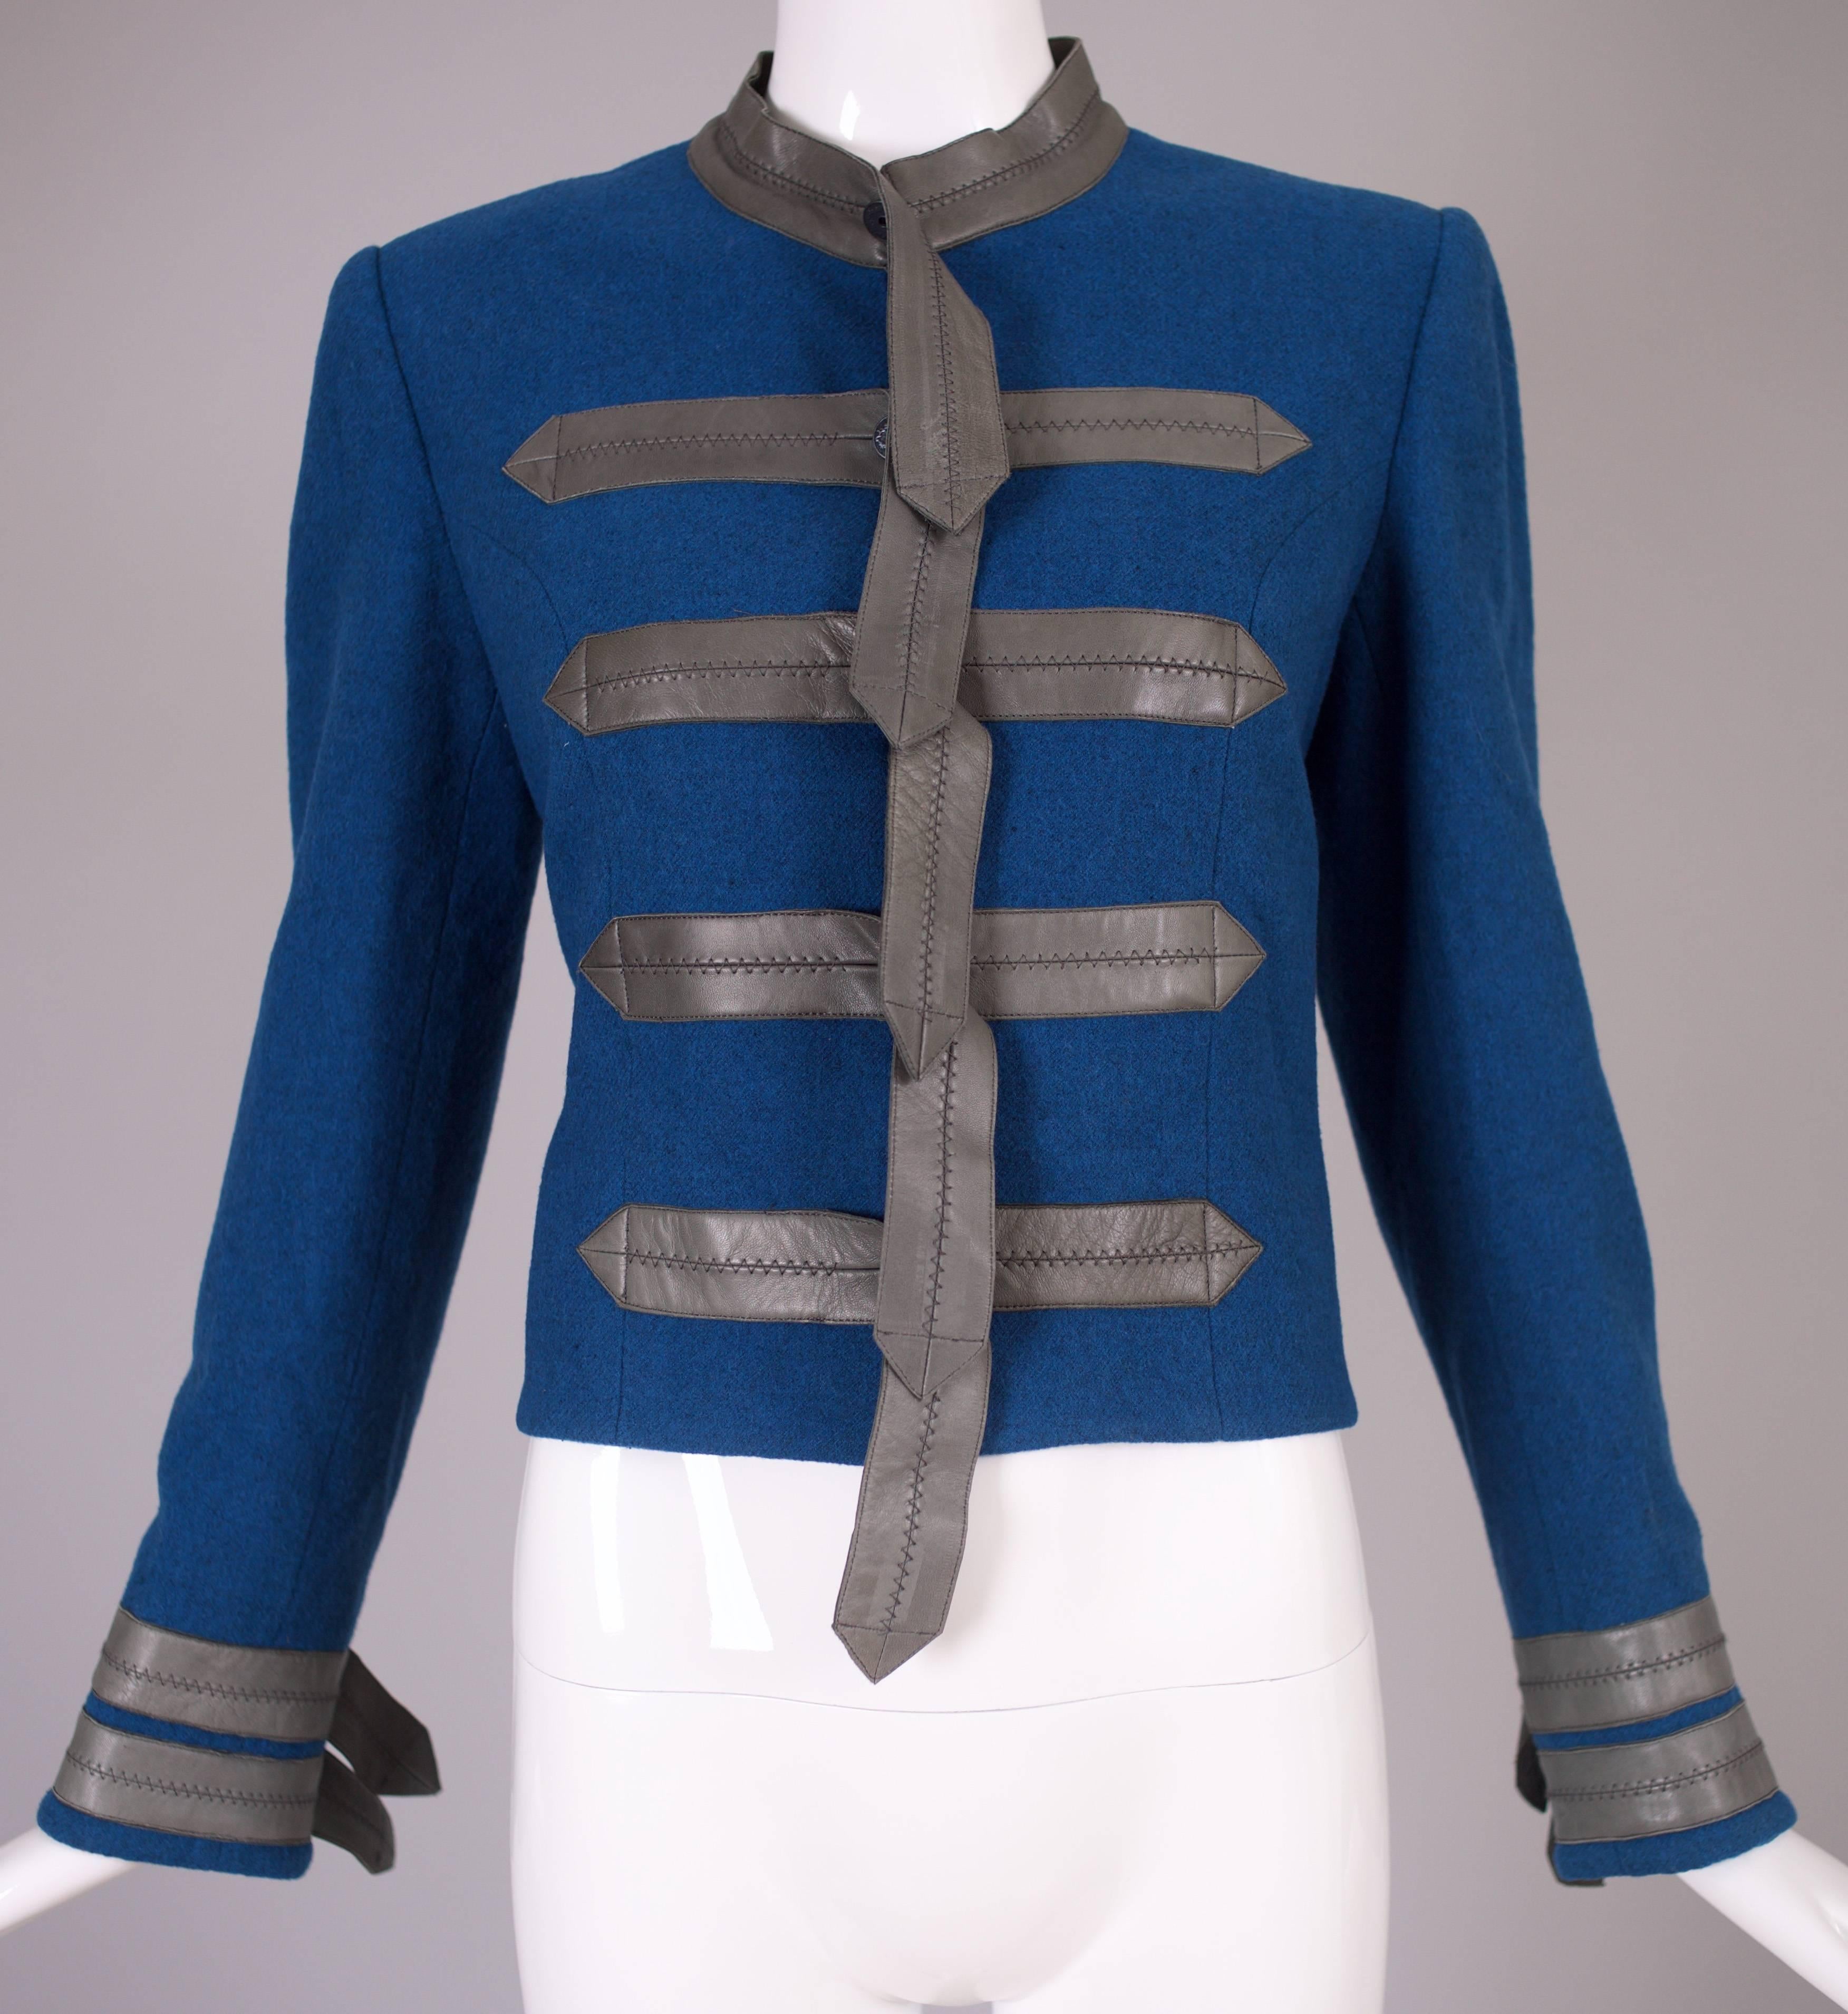 A vintage Loulou De La Falaise blue wool cropped military style jacket decorated with soft lamb leather accents down the front, neckline and at the sleeves. Entirely lined in silk, Size tag 40. In excellent condition.
MEASUREMENTS:
Shoulders - 15